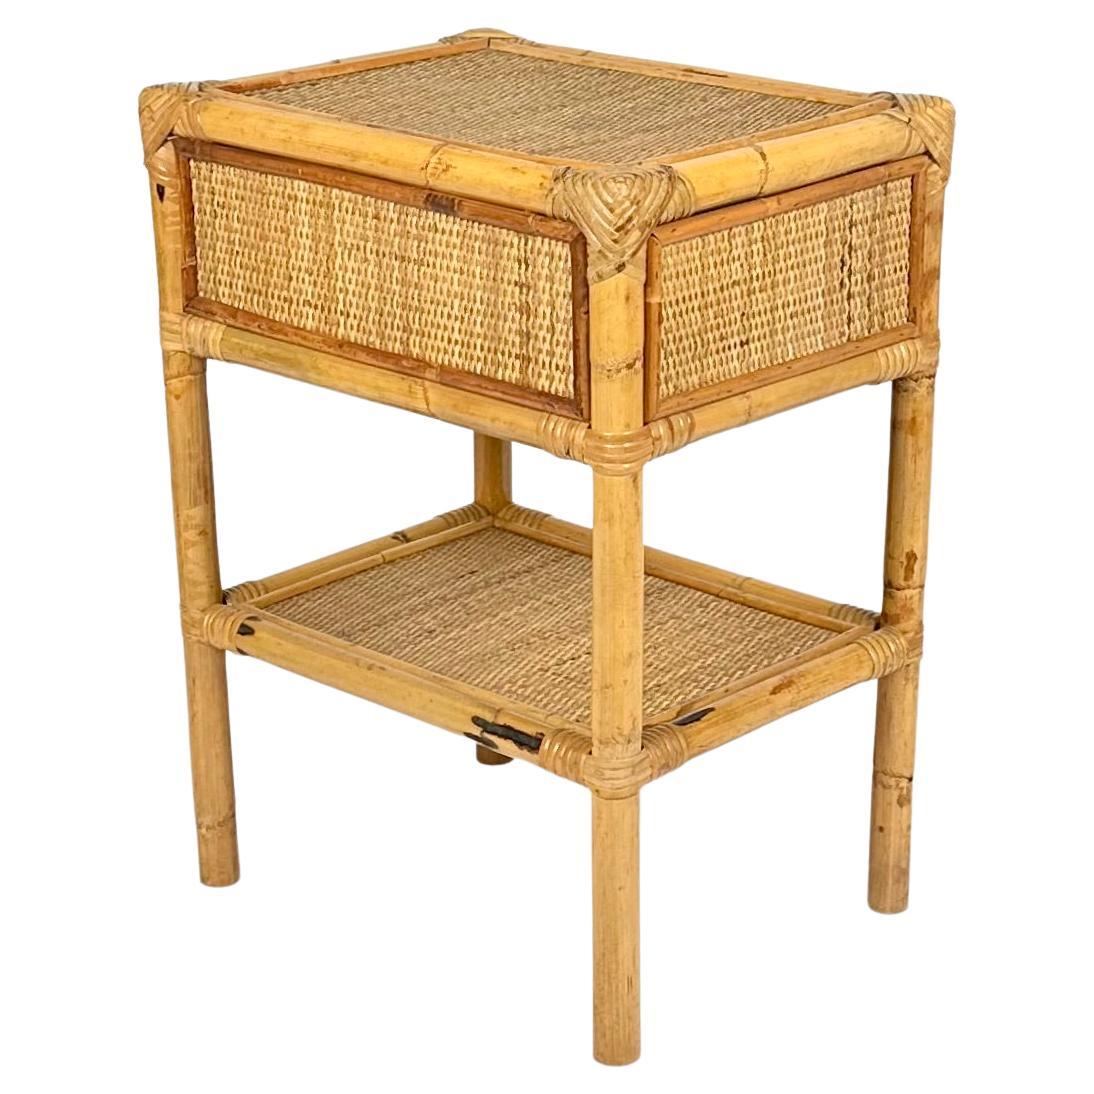 Midcentury Bedside Table Nightstand in Bamboo & Rattan, Italy, 1970s For Sale 3